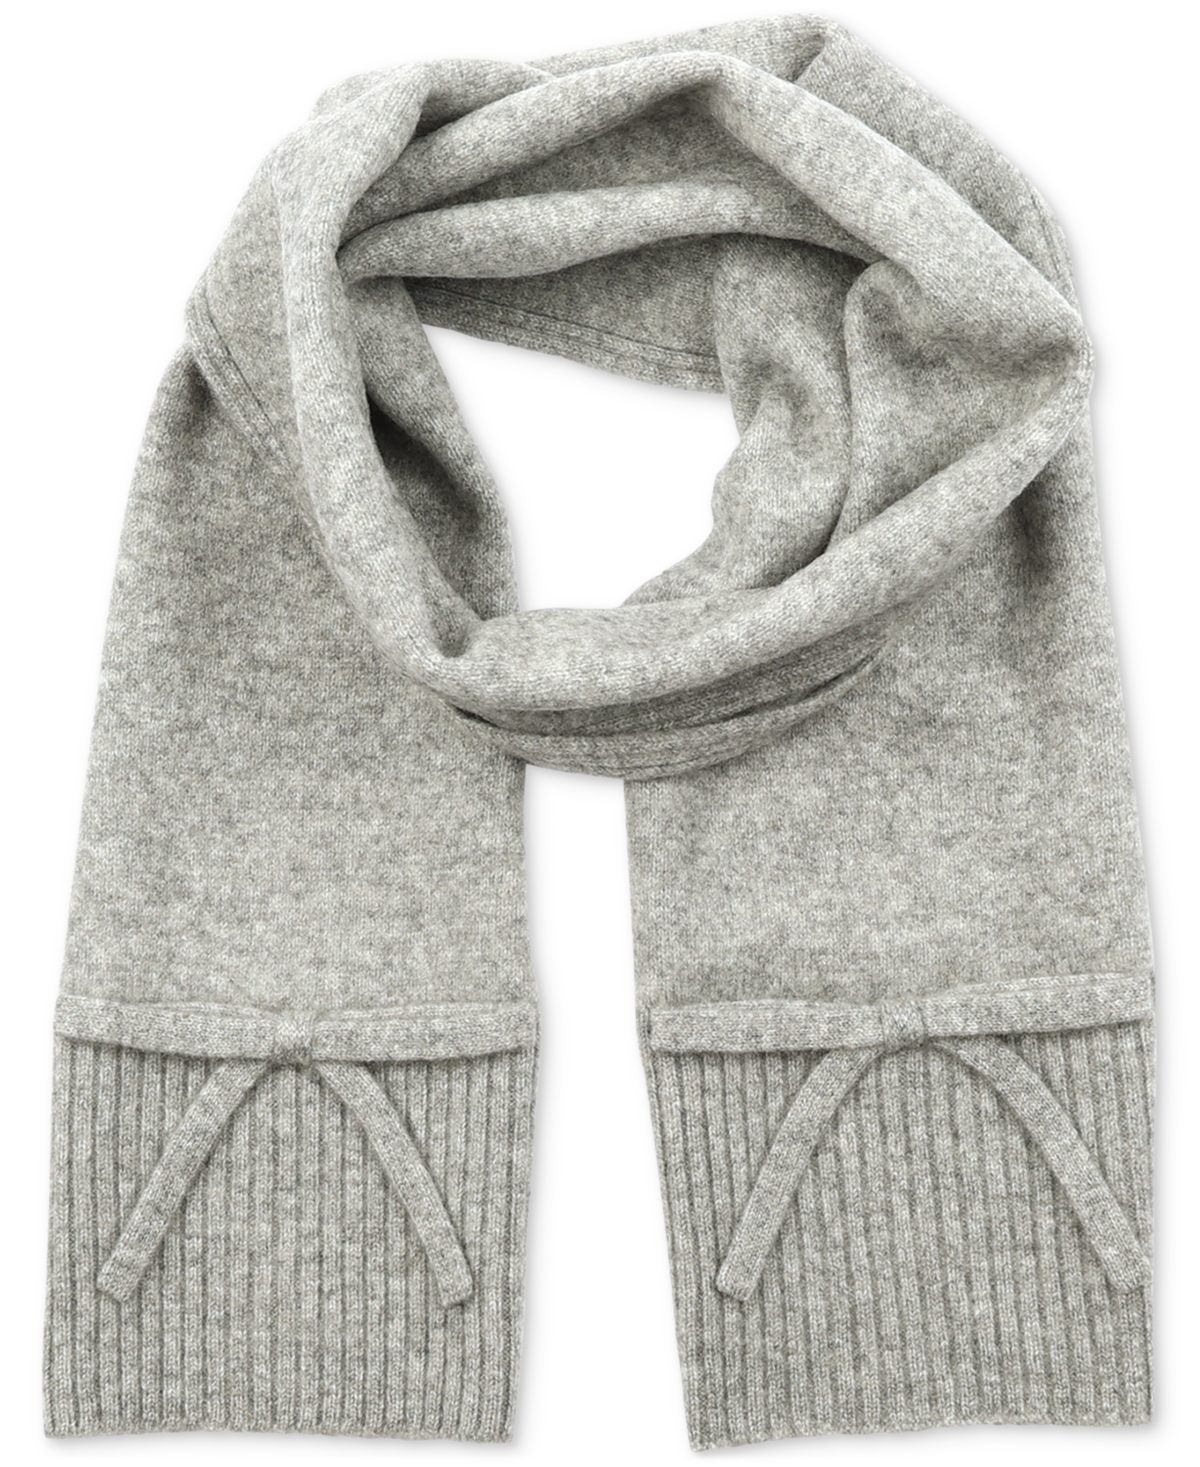 KATE SPADE WOMEN'S BOW RIBBED-TRIM KNIT SCARF